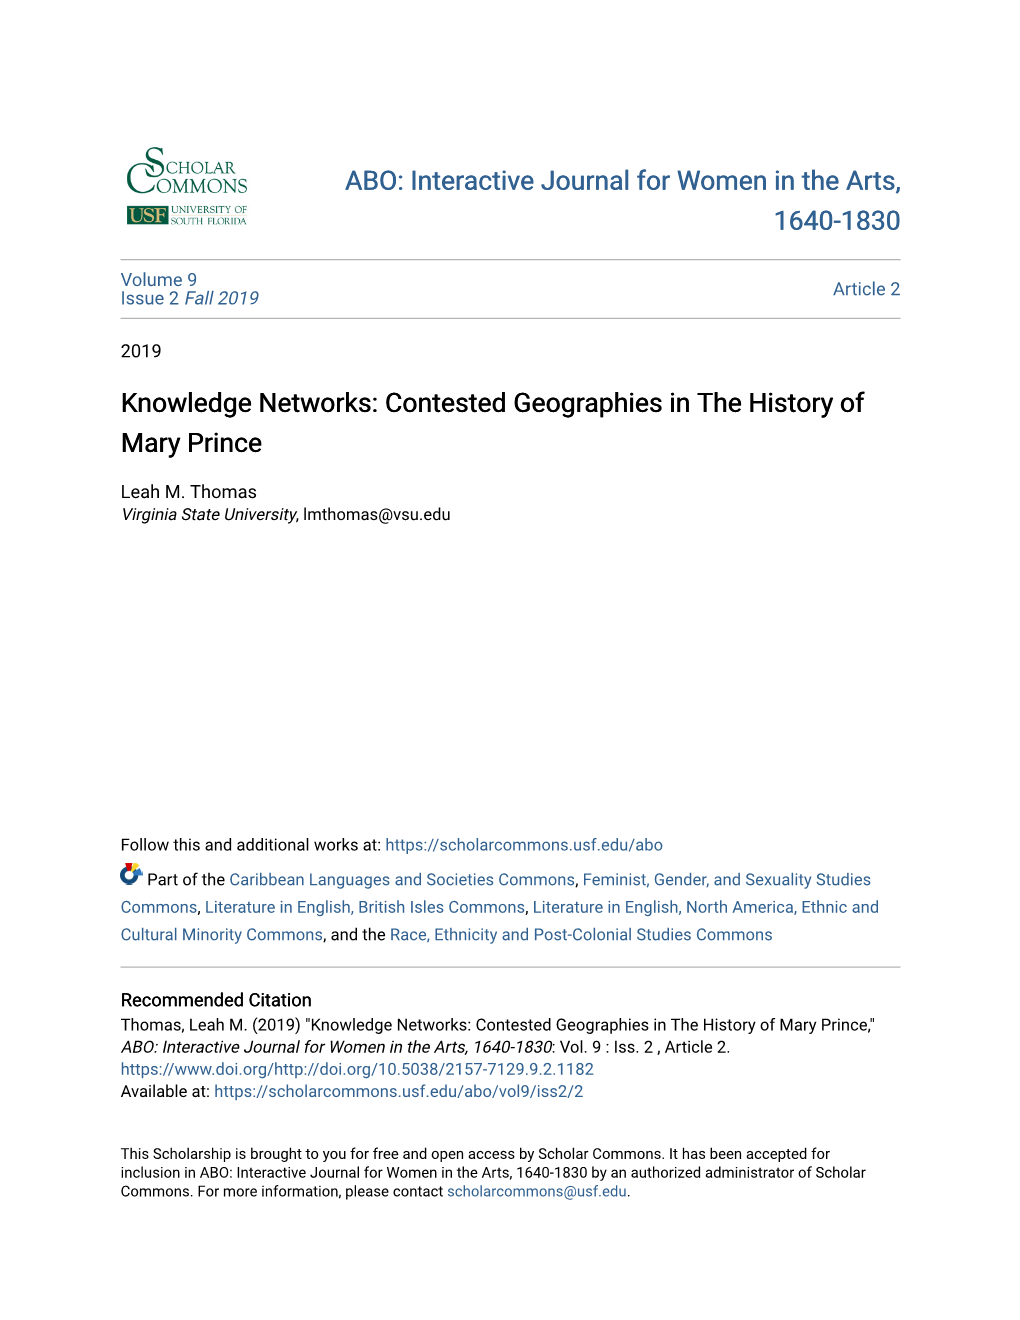 Knowledge Networks: Contested Geographies in the History of Mary Prince